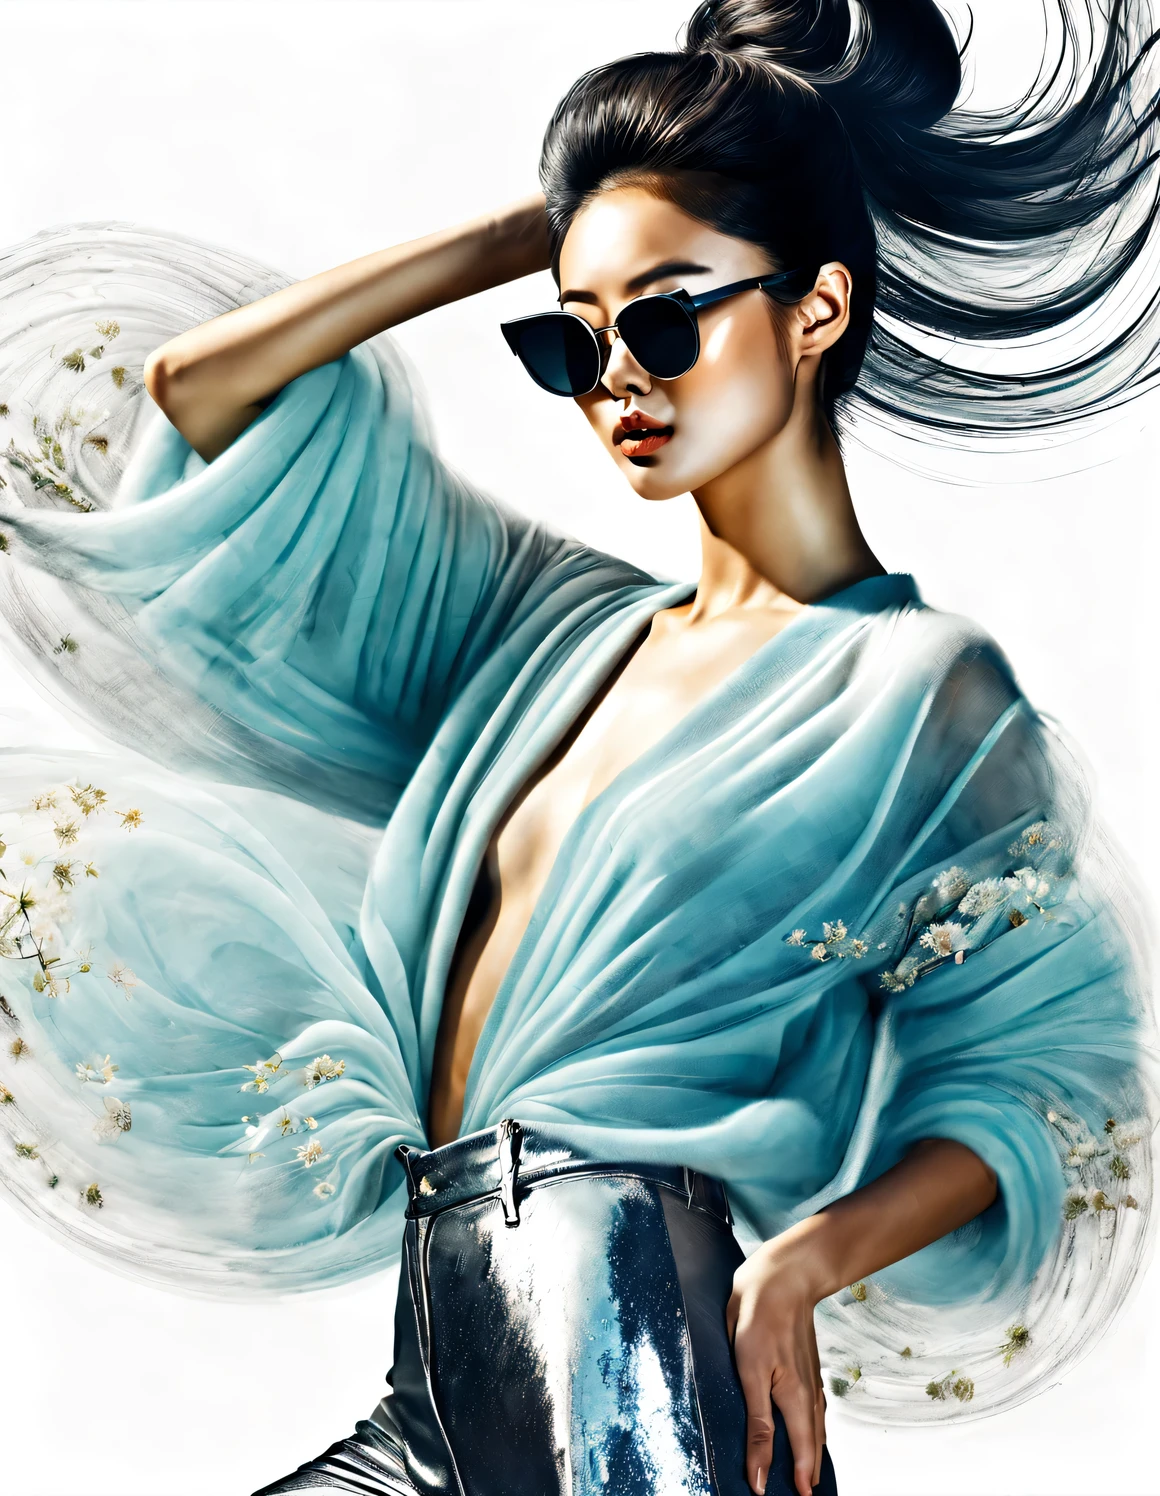 (Modern art dance simple poster design), (Half-length close-up), (Beautiful Chinese girl dancing in the air), (wearing sunglasses: 1.37), (Hair, hair covering one eye, shiny hair hairstyle: 1.2) The pastel tones of a light blue jacket and an off-white floral sweater blend together, The black and white plaid pants also have a sharp contrast, Characterized by exquisite details and layering, Both fashionable and softly feminine, Wear modern and stylish winter fashion, thin waist, high nose bridge, Head up posture, sad yet beautiful, slender figure, Exquisite facial features,
background: briefcase dance, fog illustration, ink painting, black hair, Proud, Surrealism, contemporary art photography, action painting illustration, abstract expressionism, Pixar, depth of field, motion blur, backlight, Falling shadows, Vignetting, Elevation viewing angle, Sony FE General Manager, ultra high definition, masterpiece, Accuracy, textured skin, Super details, high detail, high quality, Award-winning, best quality, Level, 16k, Photographed from a bottom-up perspective,